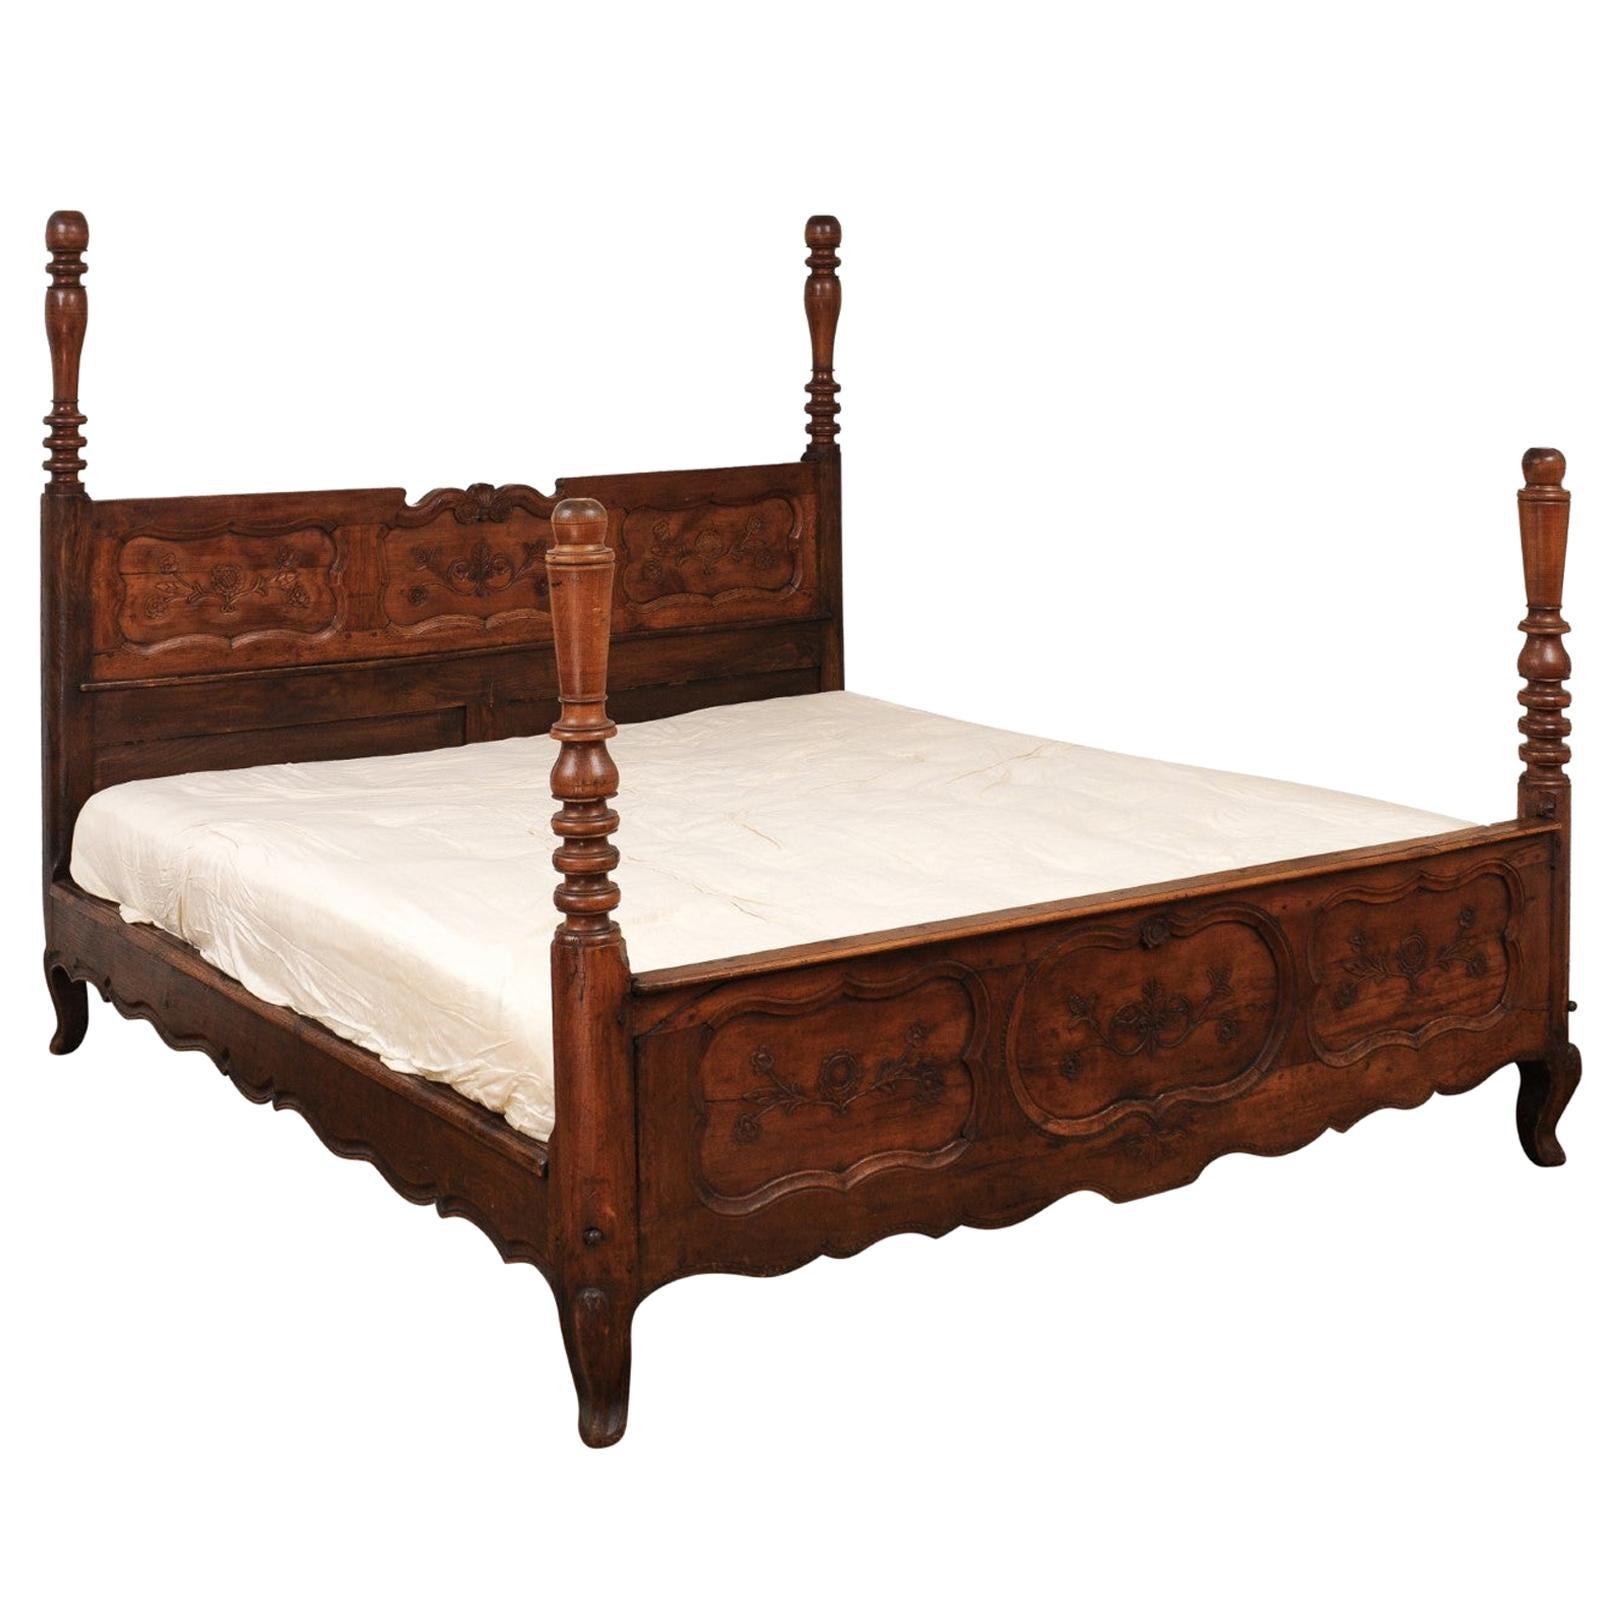 French 1870s Napoléon III Period Walnut Bed with Low-Relief Carved Floral Décor